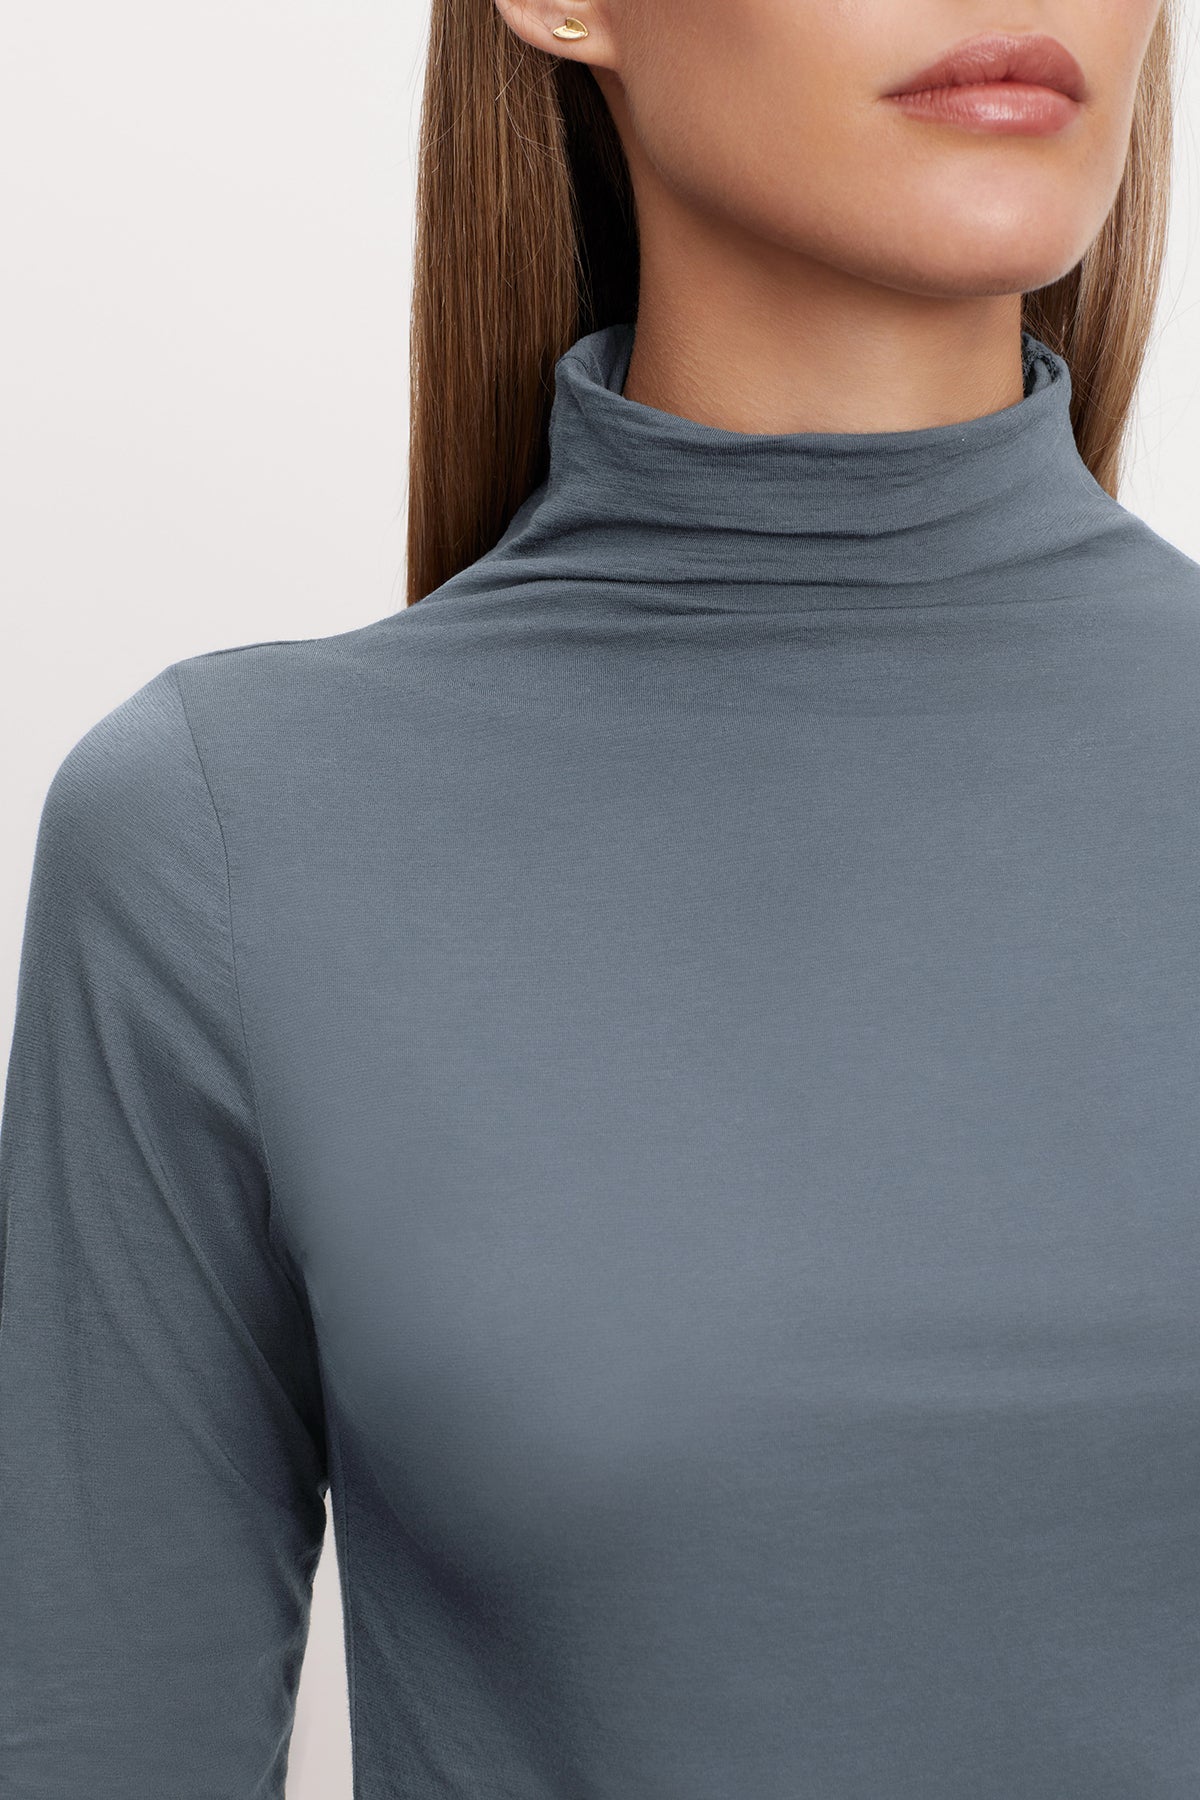 A woman wearing a grey TALISIA GAUZY WHISPER FITTED MOCK NECK TEE, a versatile wardrobe staple in the fashion world by Velvet by Graham & Spencer.-36001491550401